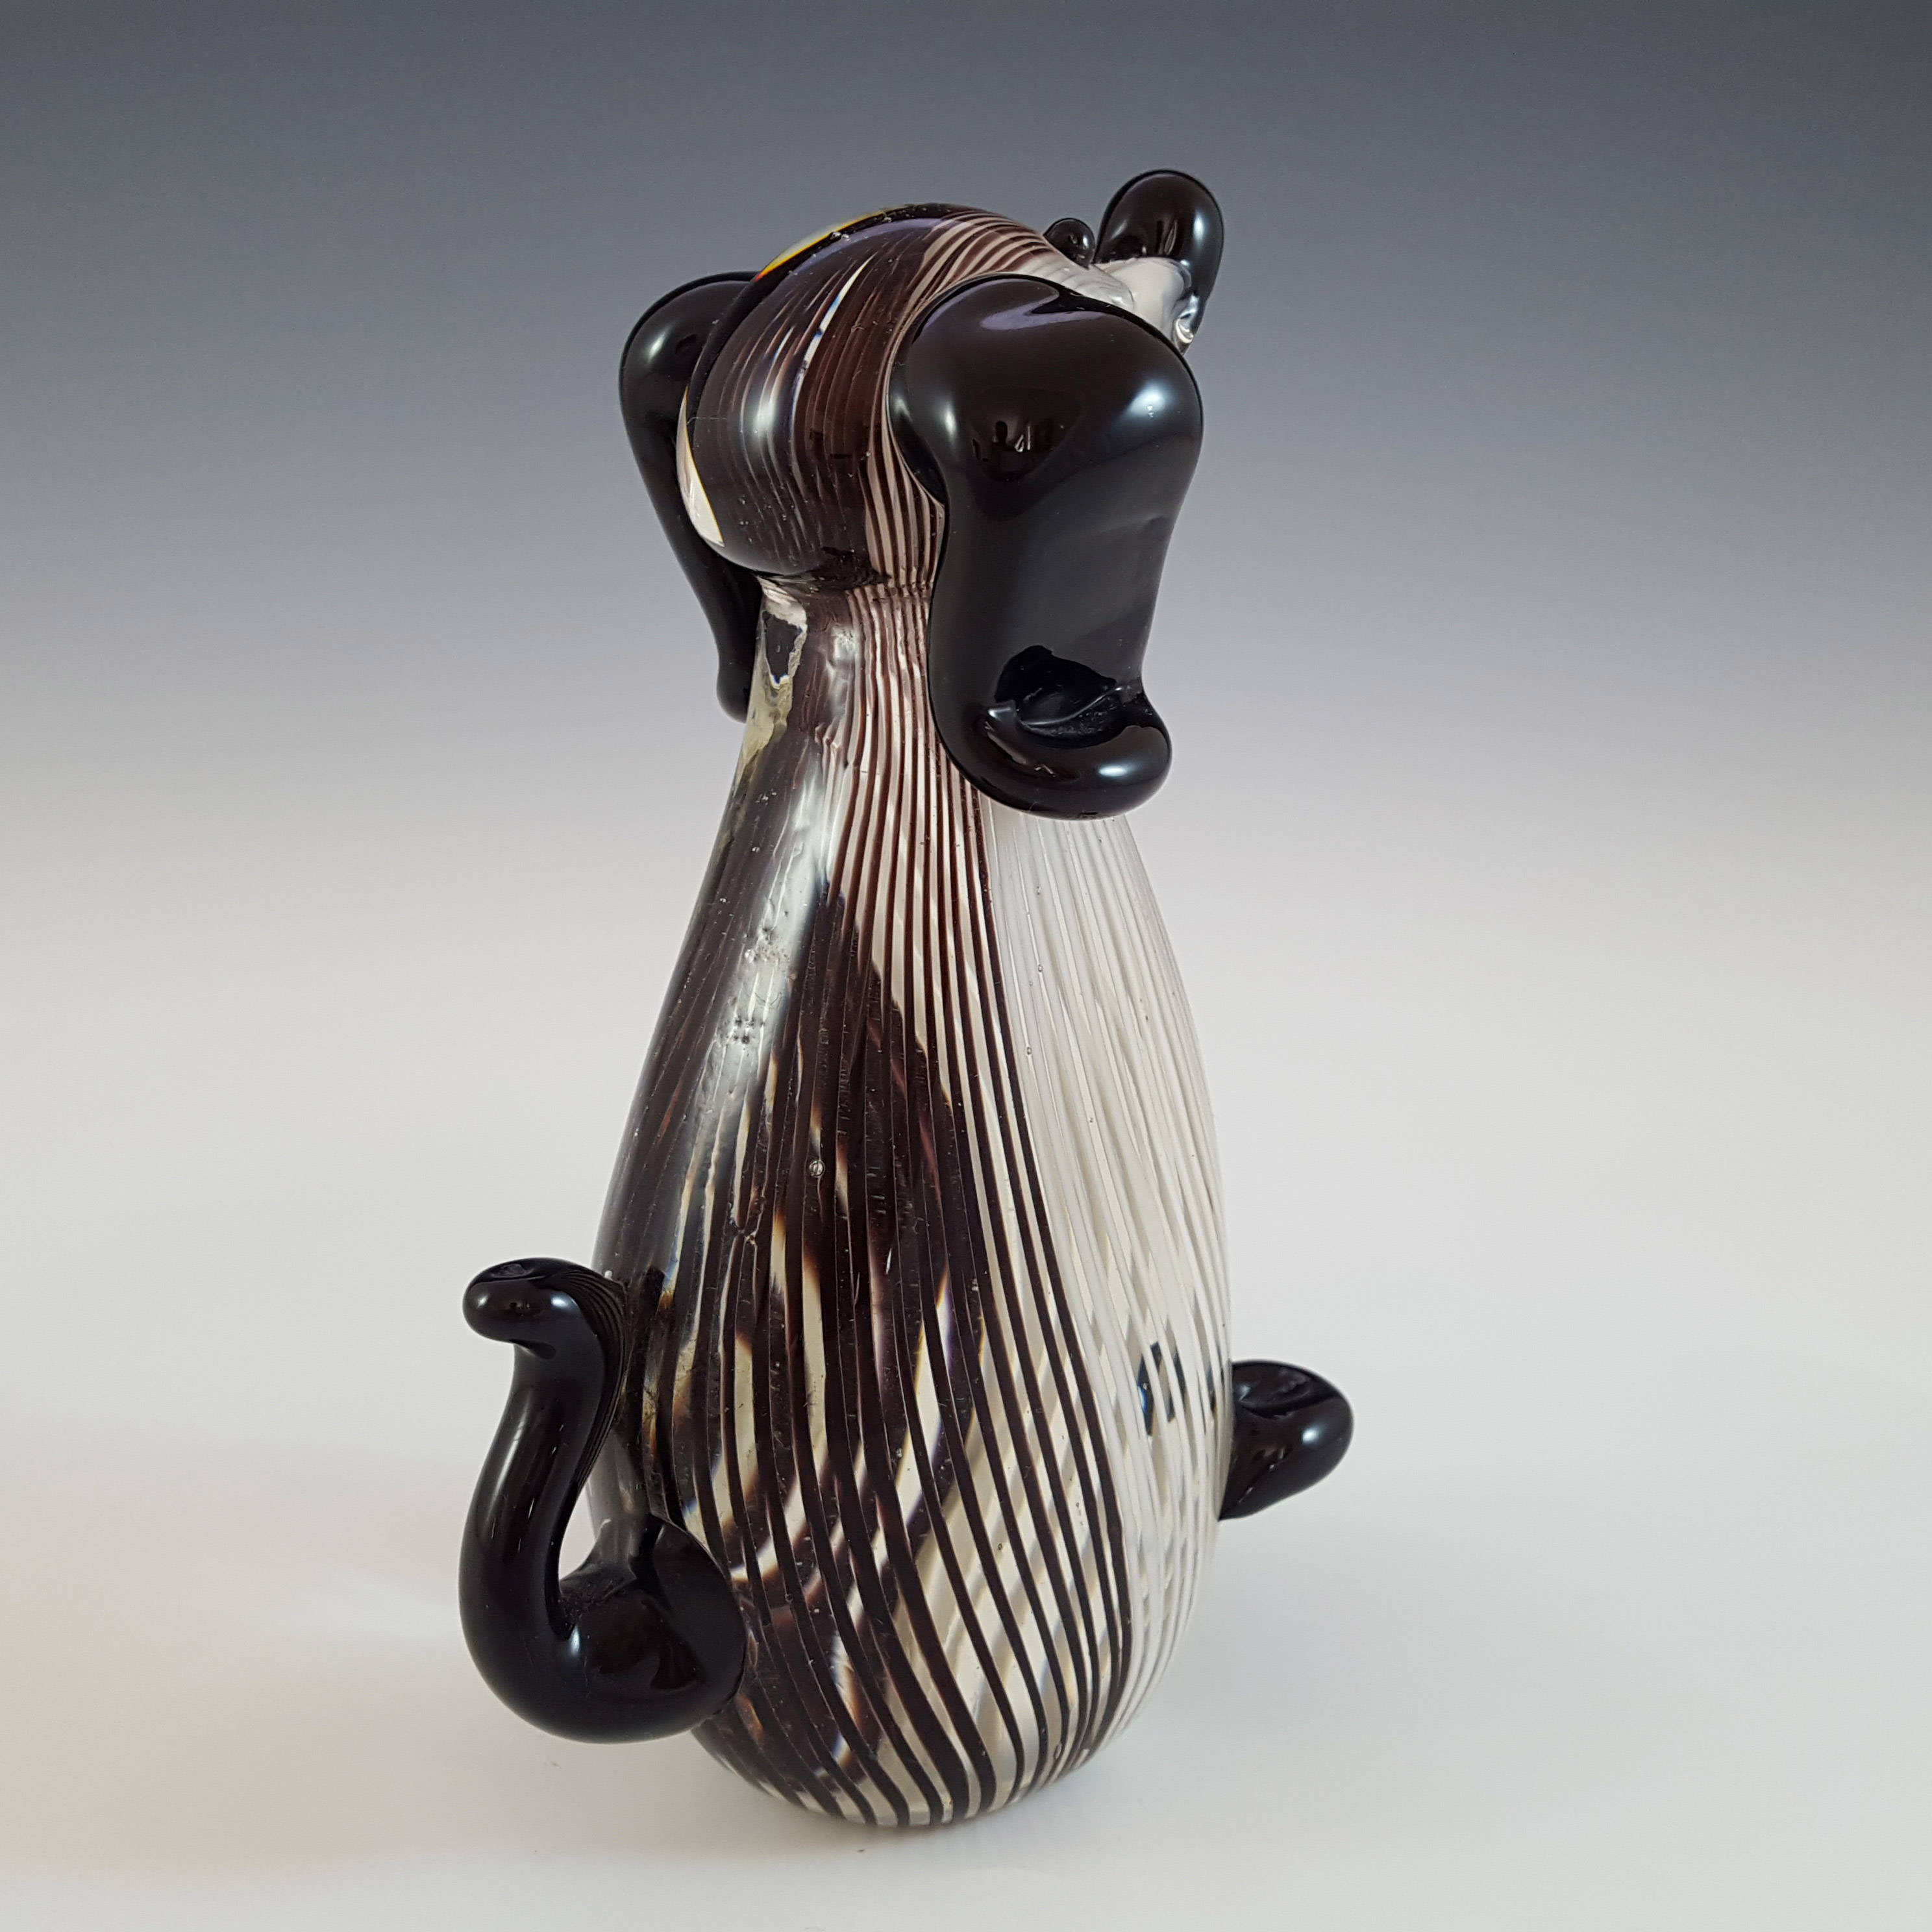 Crystal Clear Collectables Black & White Glass Dog Sculpture - Click Image to Close